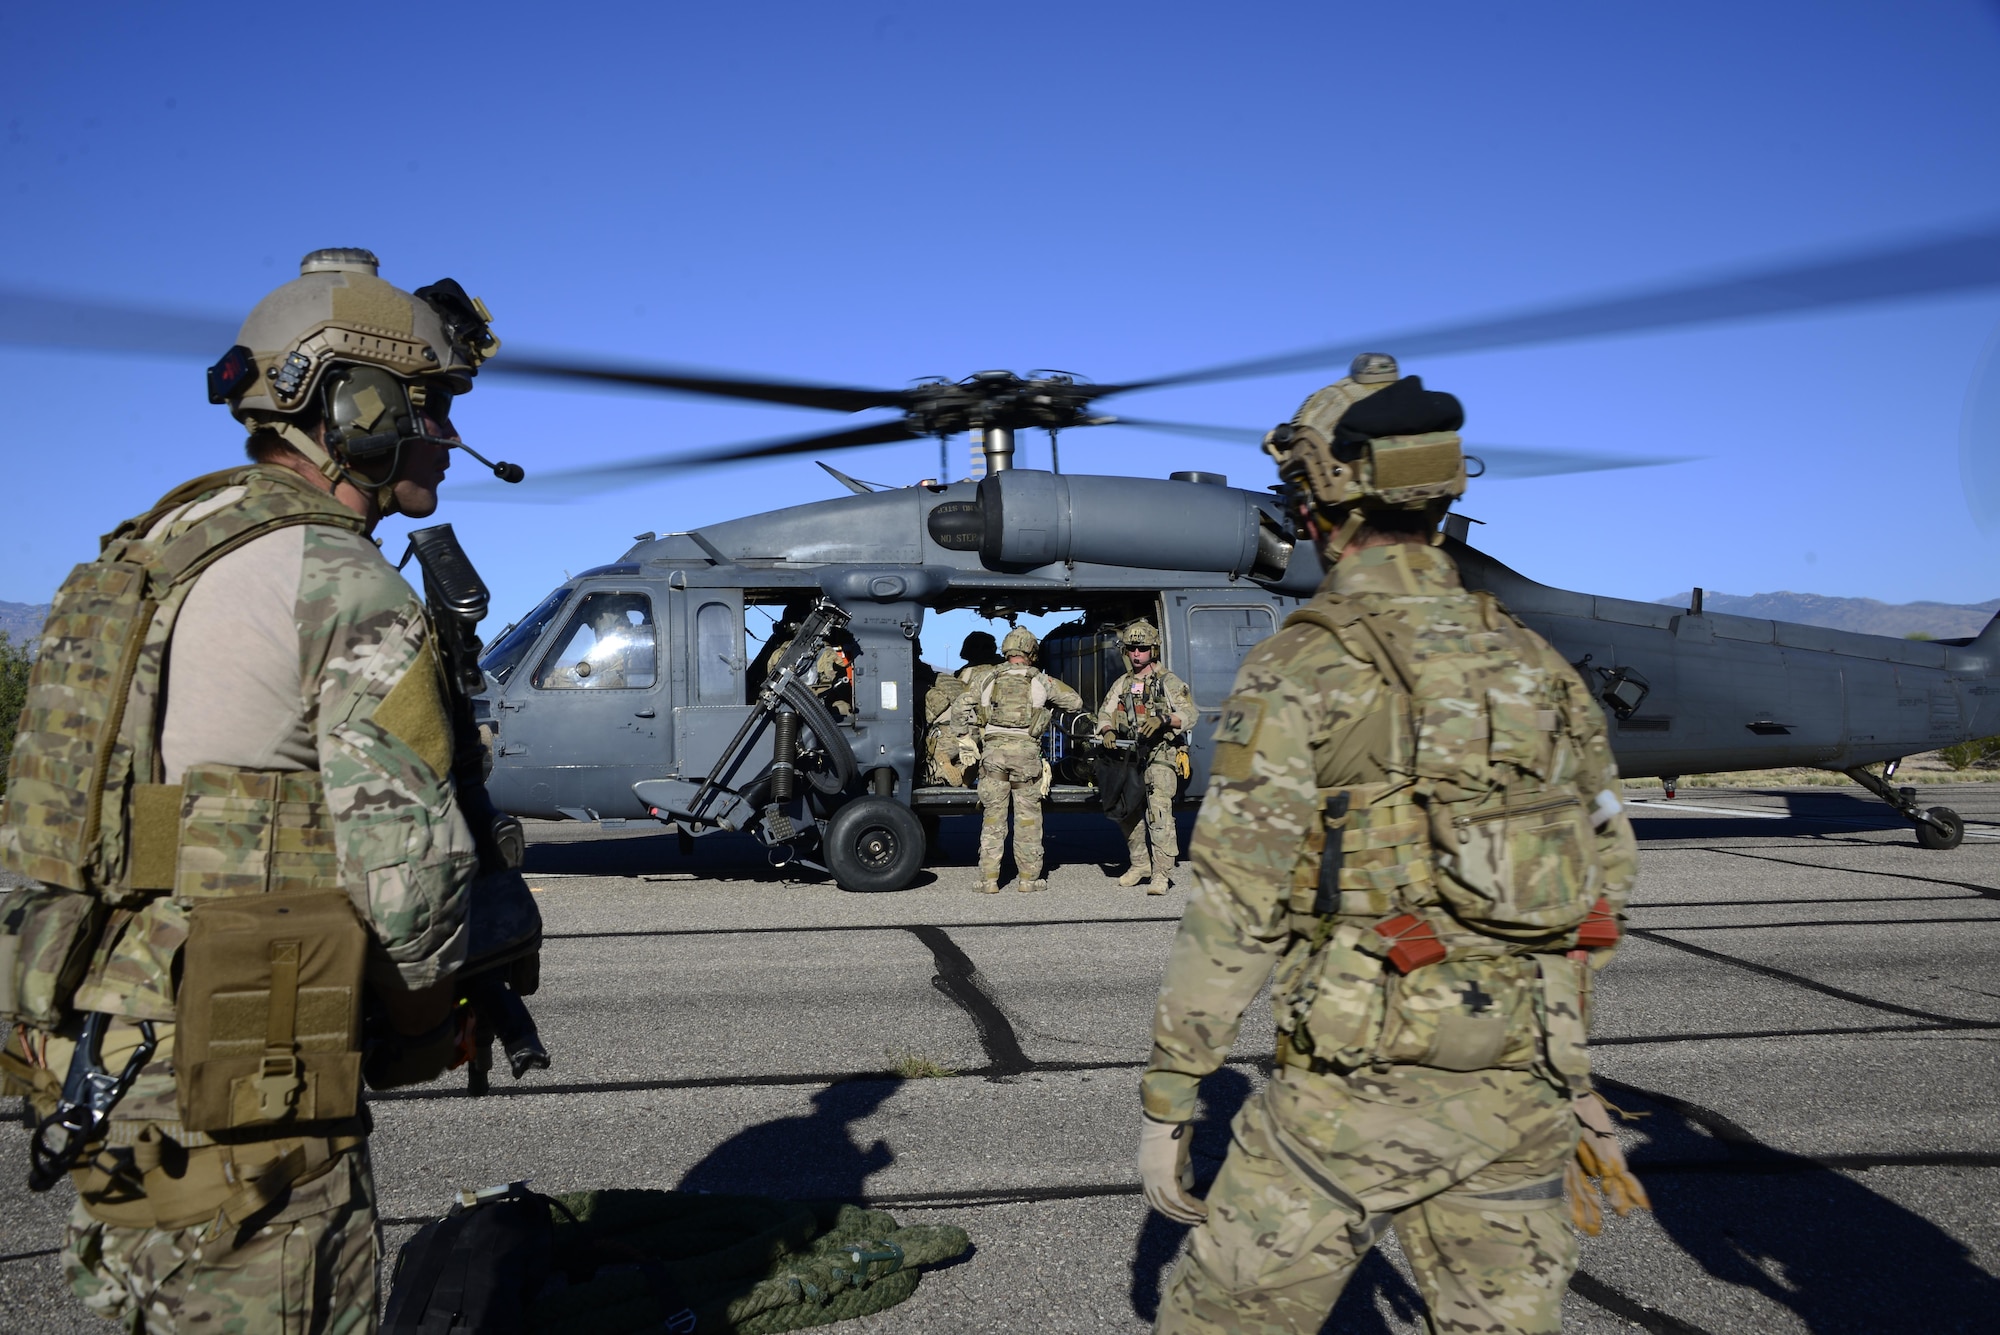 Pararescuemen assigned to the 48th Rescue Squadron load gear on an HH-60G Pave Hawk in preparation for alternate insertion/extraction training at Davis-Monthan Air Force Base, Ariz., Oct. 18, 2016.  The 48th RQS deploys worldwide in support of national security objectives and homeland defense, providing highly trained experts capable of quickly and effectively executing personnel recovery operations. (U.S. Air Force photo by Senior Airman Betty R. Chevalier)